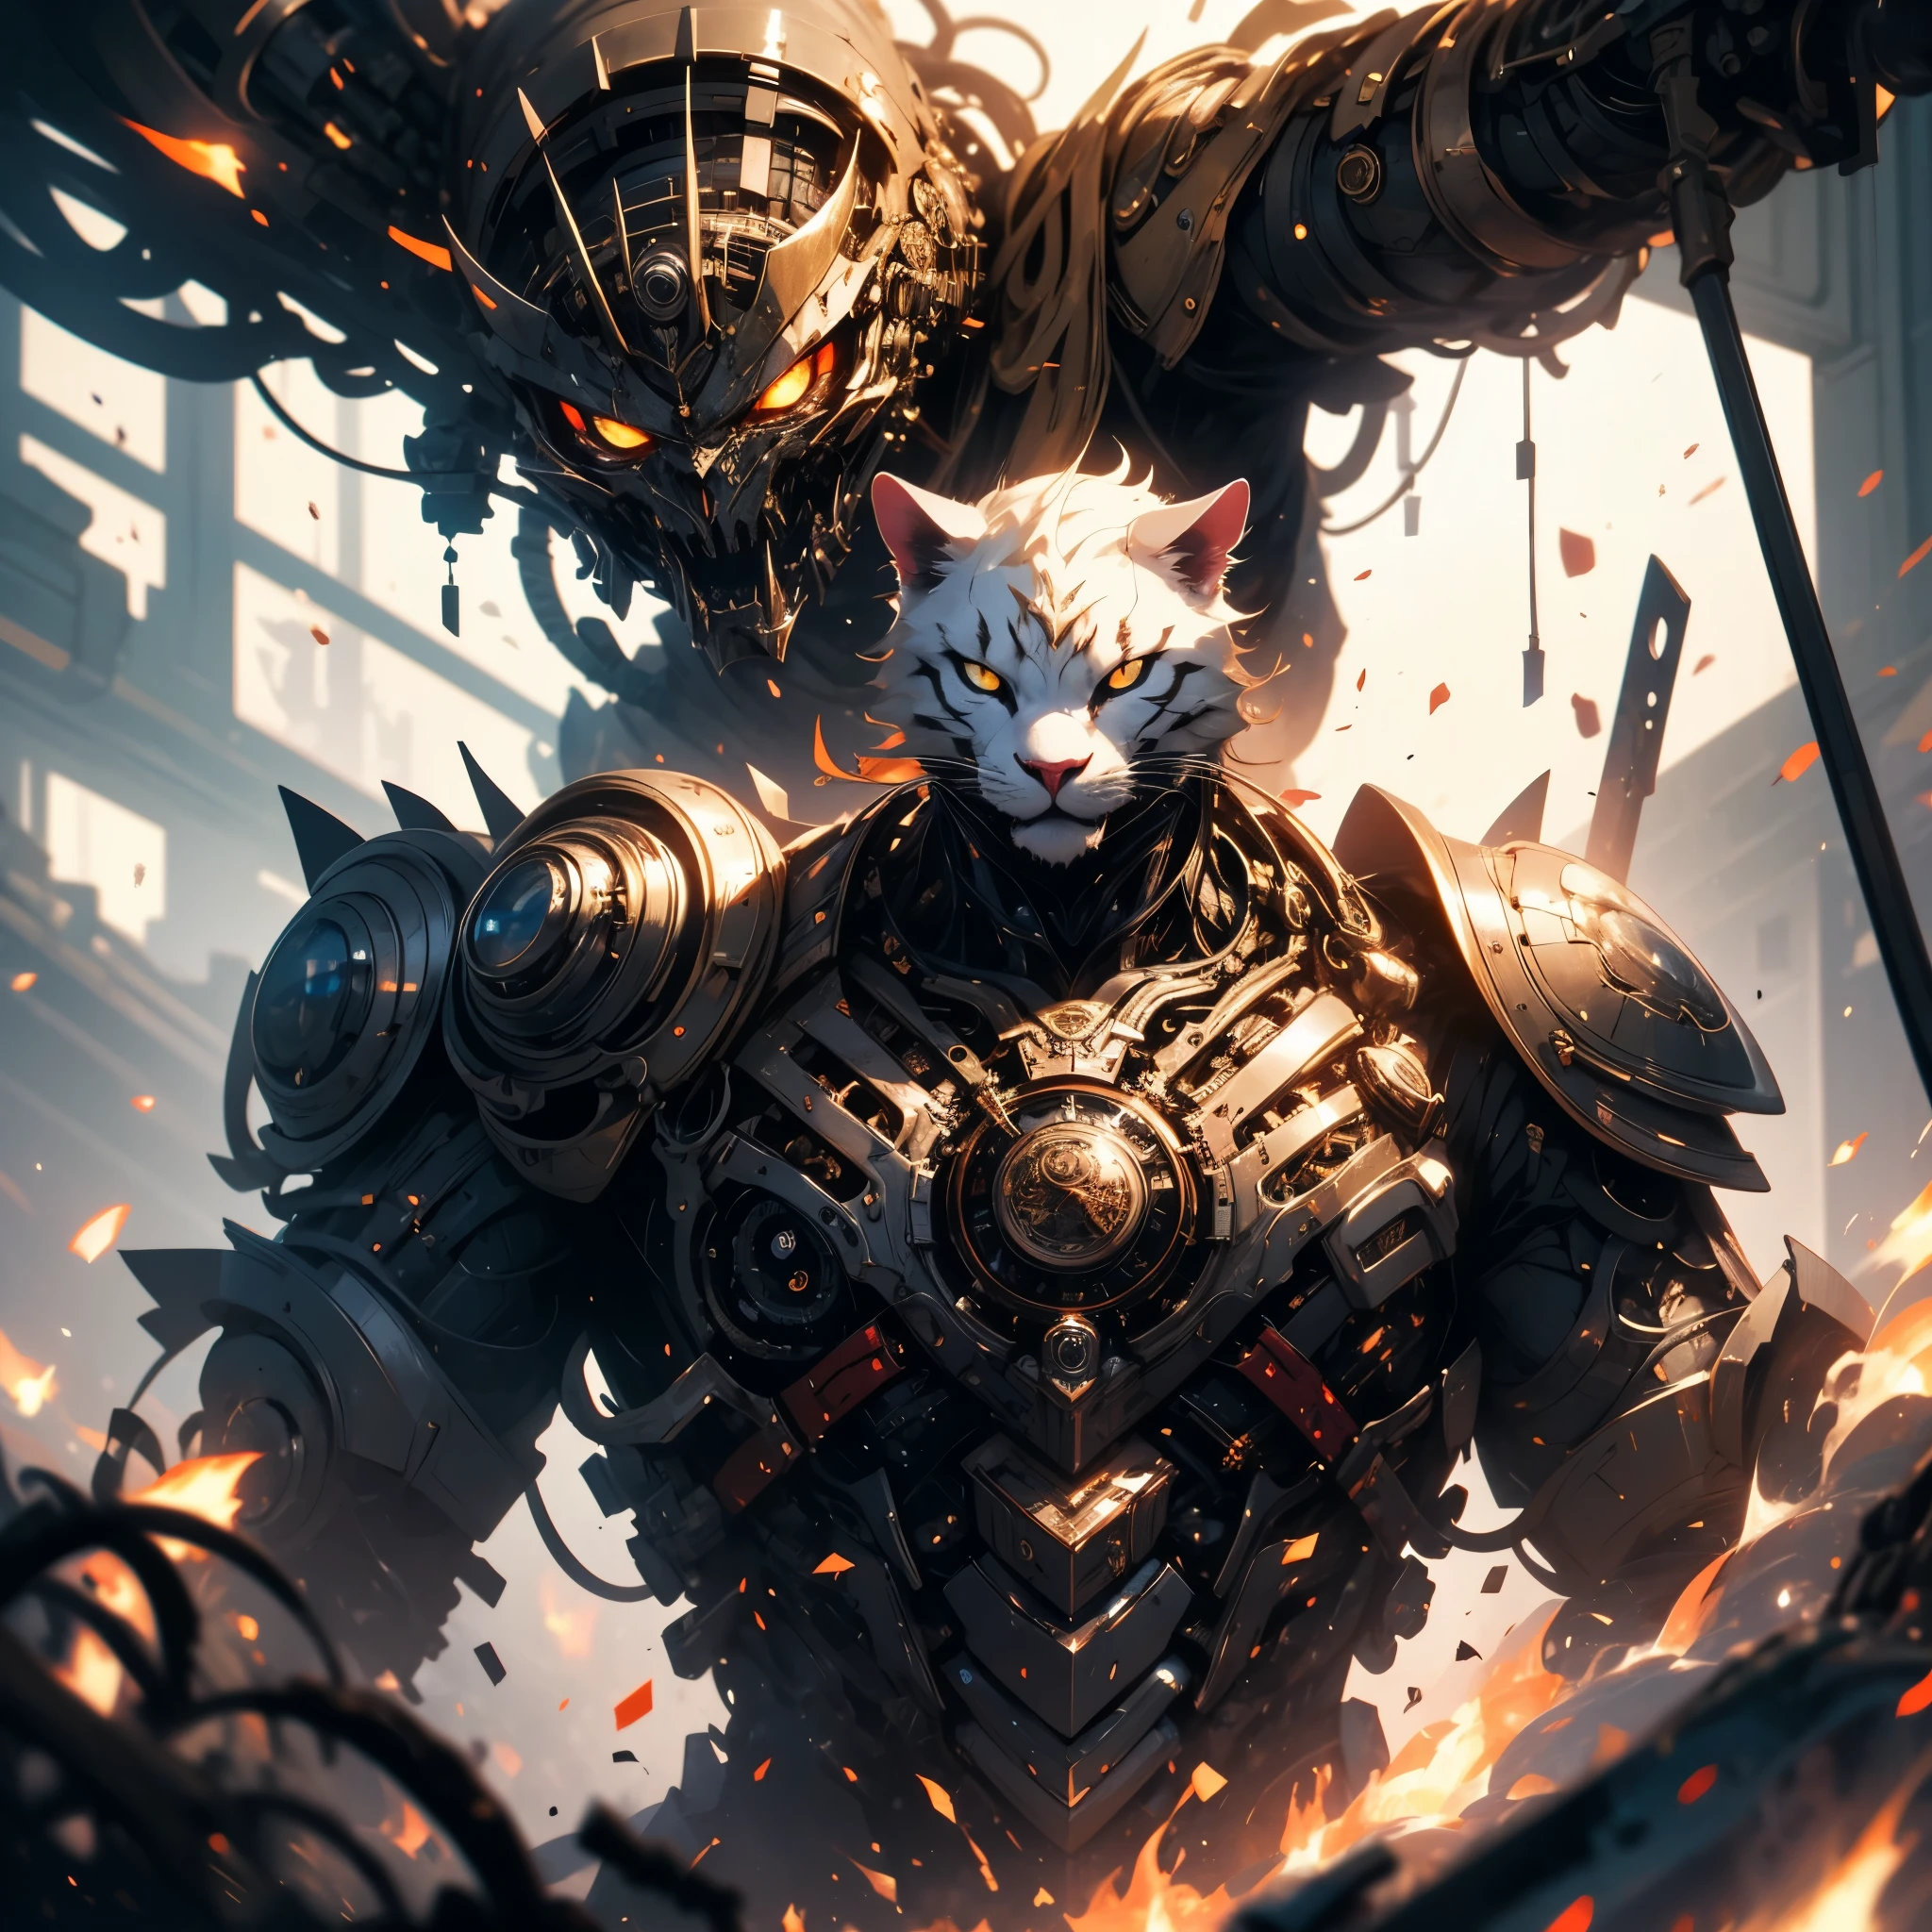 (best quality,4k,8k,highres,masterpiece:1.2),ultra-detailed,(realistic,photorealistic,photo-realistic:1.37),steampunk,cat,mechanical knight,Victorian England,chest cockpit,challenge,weapon,sword,industrial,steam-powered,metallic,ornate,engravings,automaton,gears,vintage,antique,detailed,mechanism,steering wheel,leather seats,clockwork,exquisite craftsmanship,clock gears,brass fittings,elaborate design,suit of armor,cat ears,mechanical tail,intricate,driving mechanism,adventurous atmosphere,mechanical creation,levers and switches,retro-futuristic,elegant style,mechanical precision,copper pipes,steaming vents,gauges,pistons,sparks,industrial revolution,metallic clanking,duel,steam-powered locomotion,steely determination,vivid colors,soft lighting